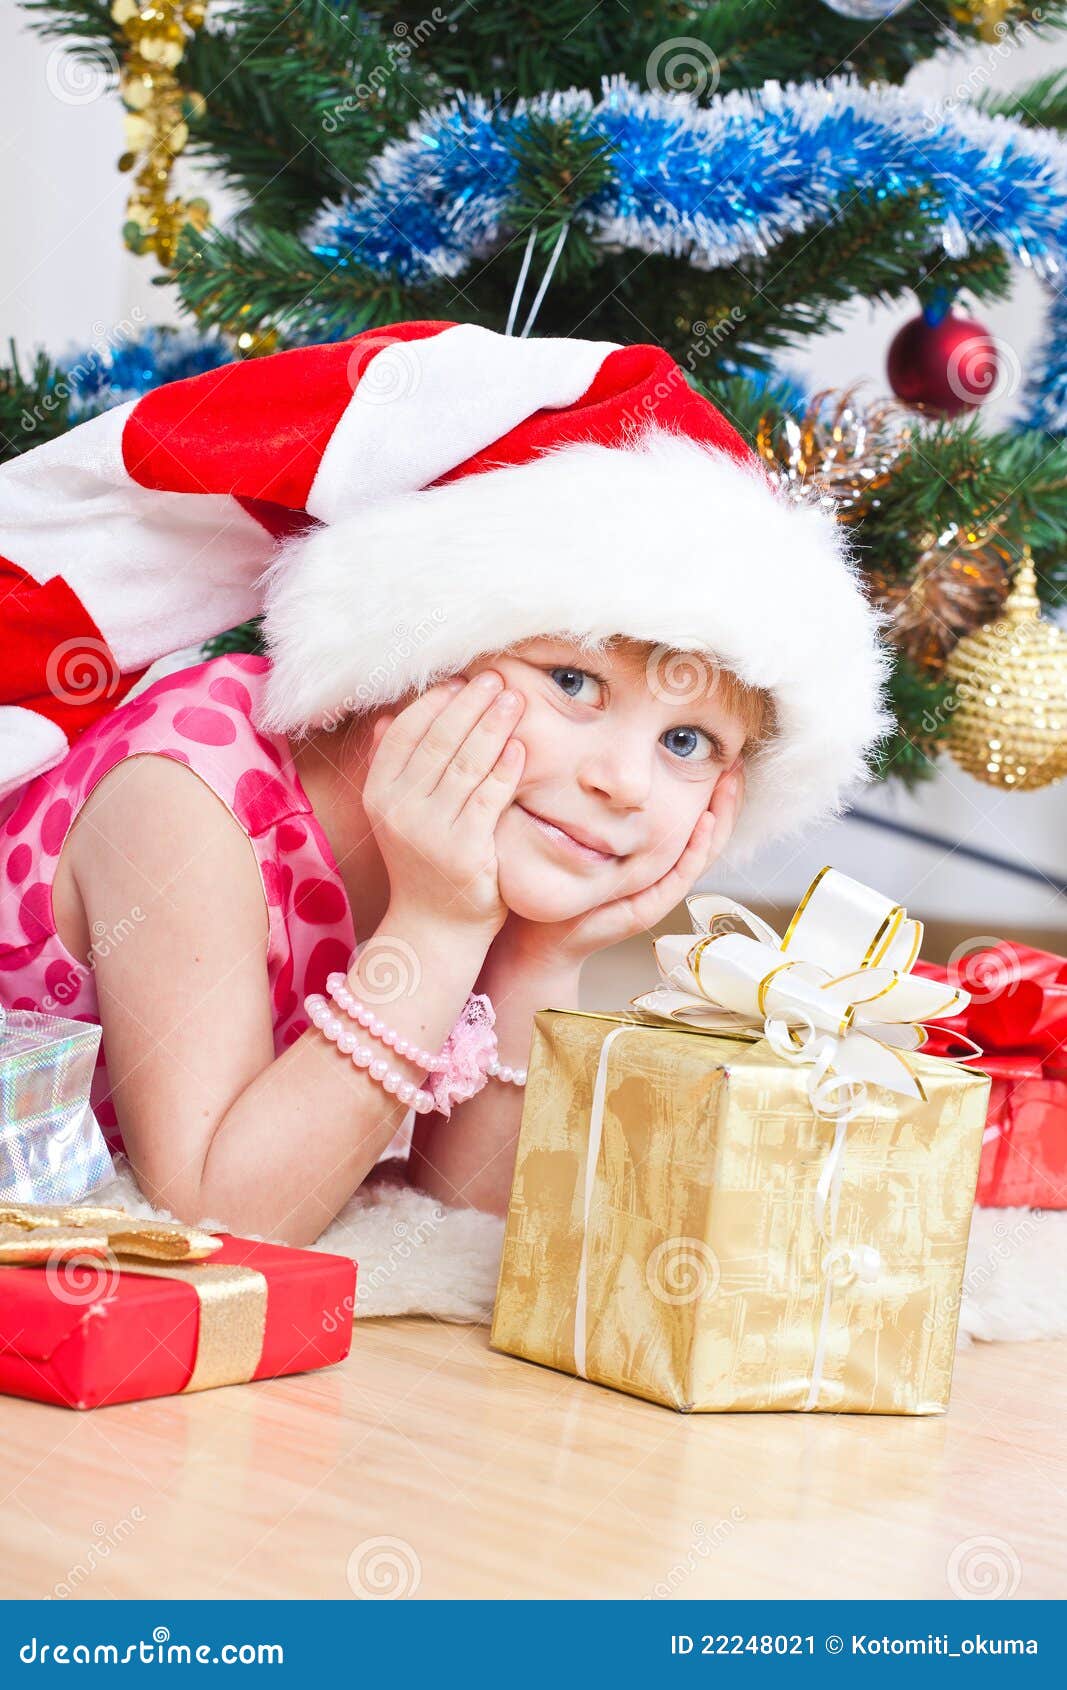 girl-with-gifts-near-a-new-year-tree-stock-image-image-of-holiday